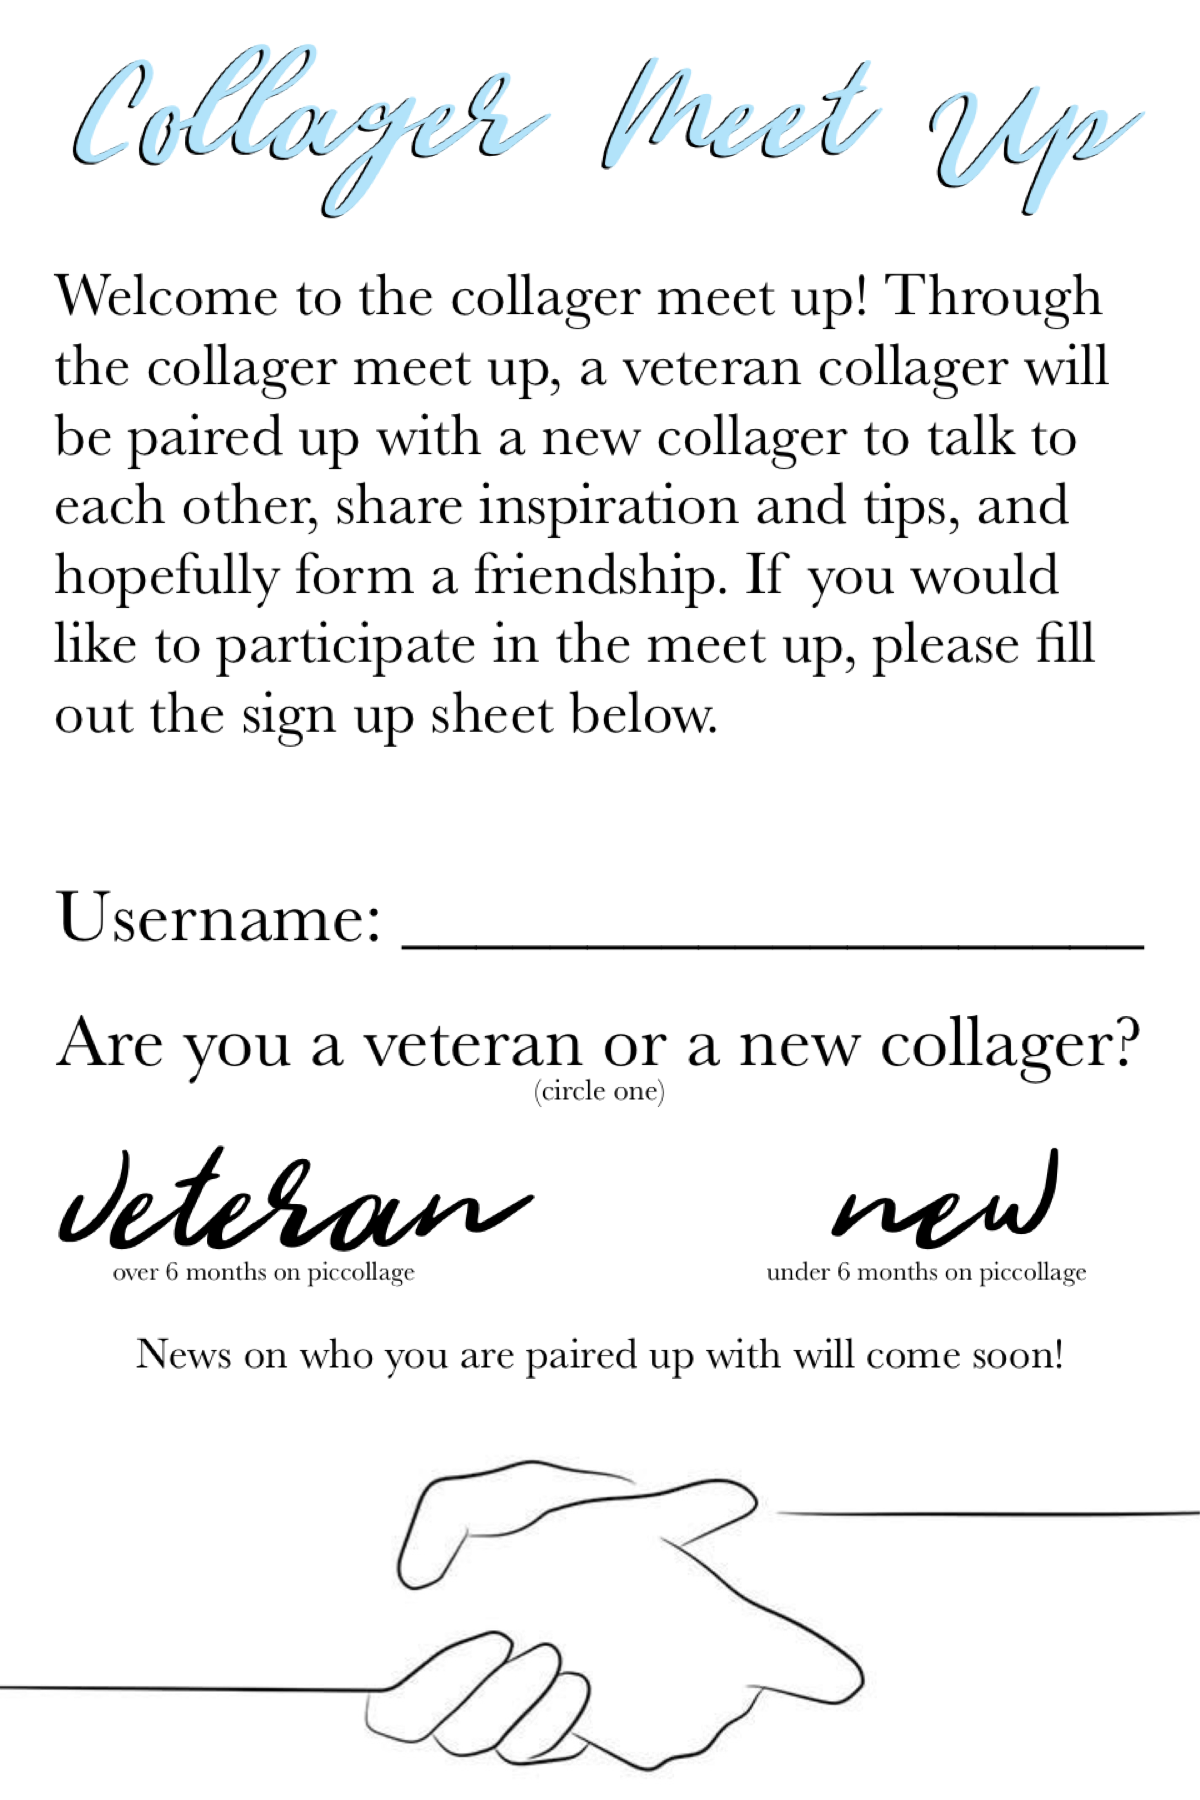 Collager Meet Up! It would be great if you could participate!